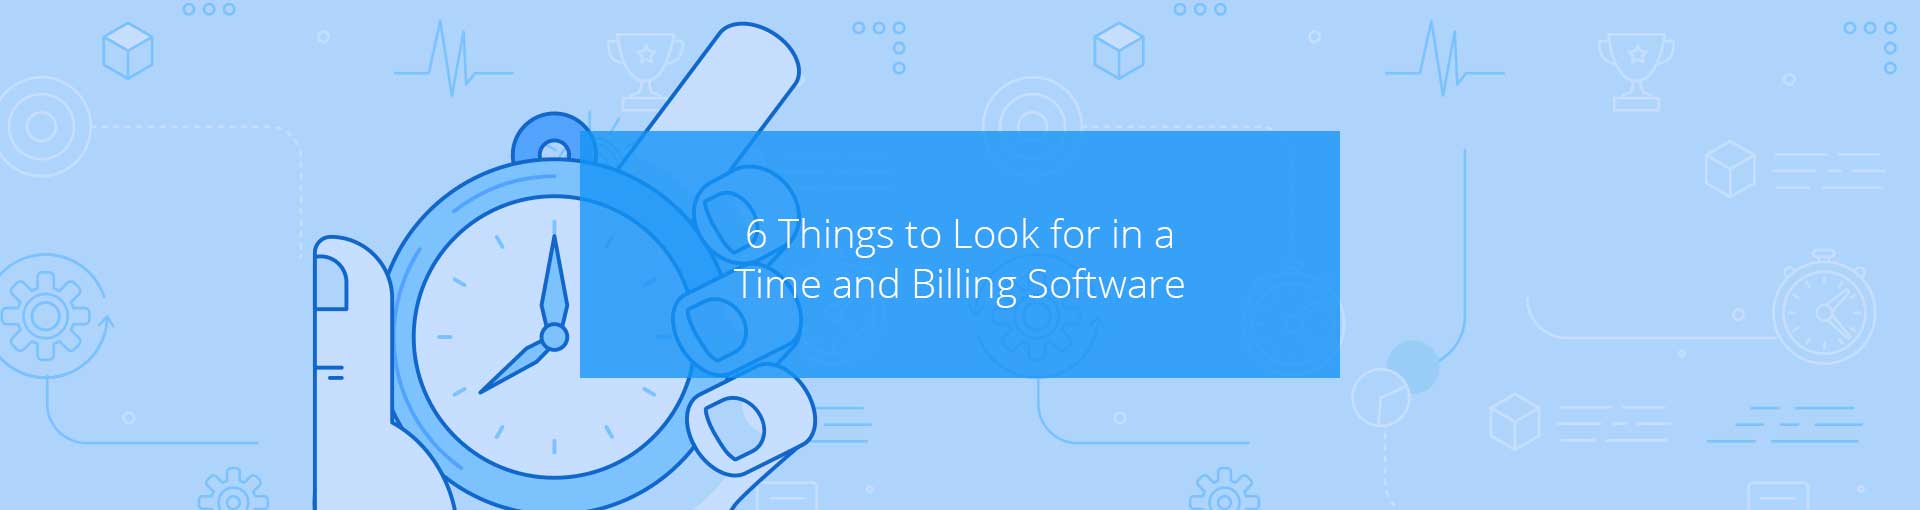 6 Vital Features to Look For in a Time and Billing Software Featured Image